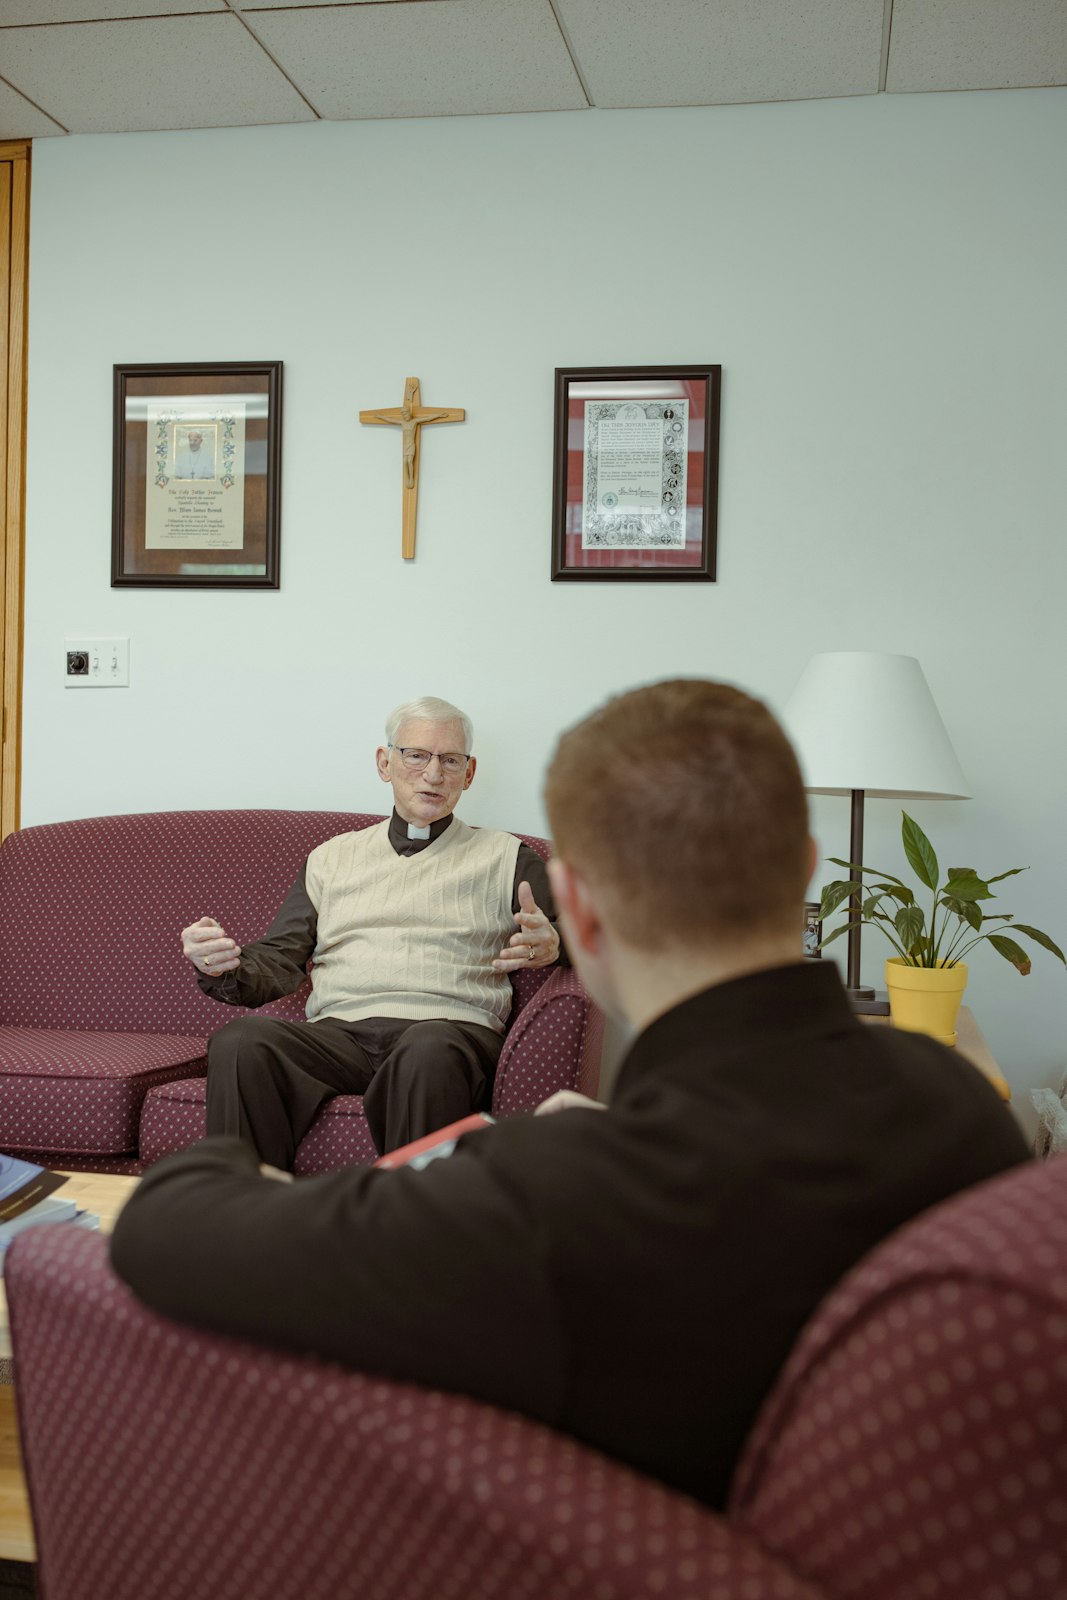 Fr. Nowak, right, interviews Msgr. McEnhill for a class assignment. Fr. Nowak is taking online courses toward a master's in business administration from the University of Mary in North Dakota.